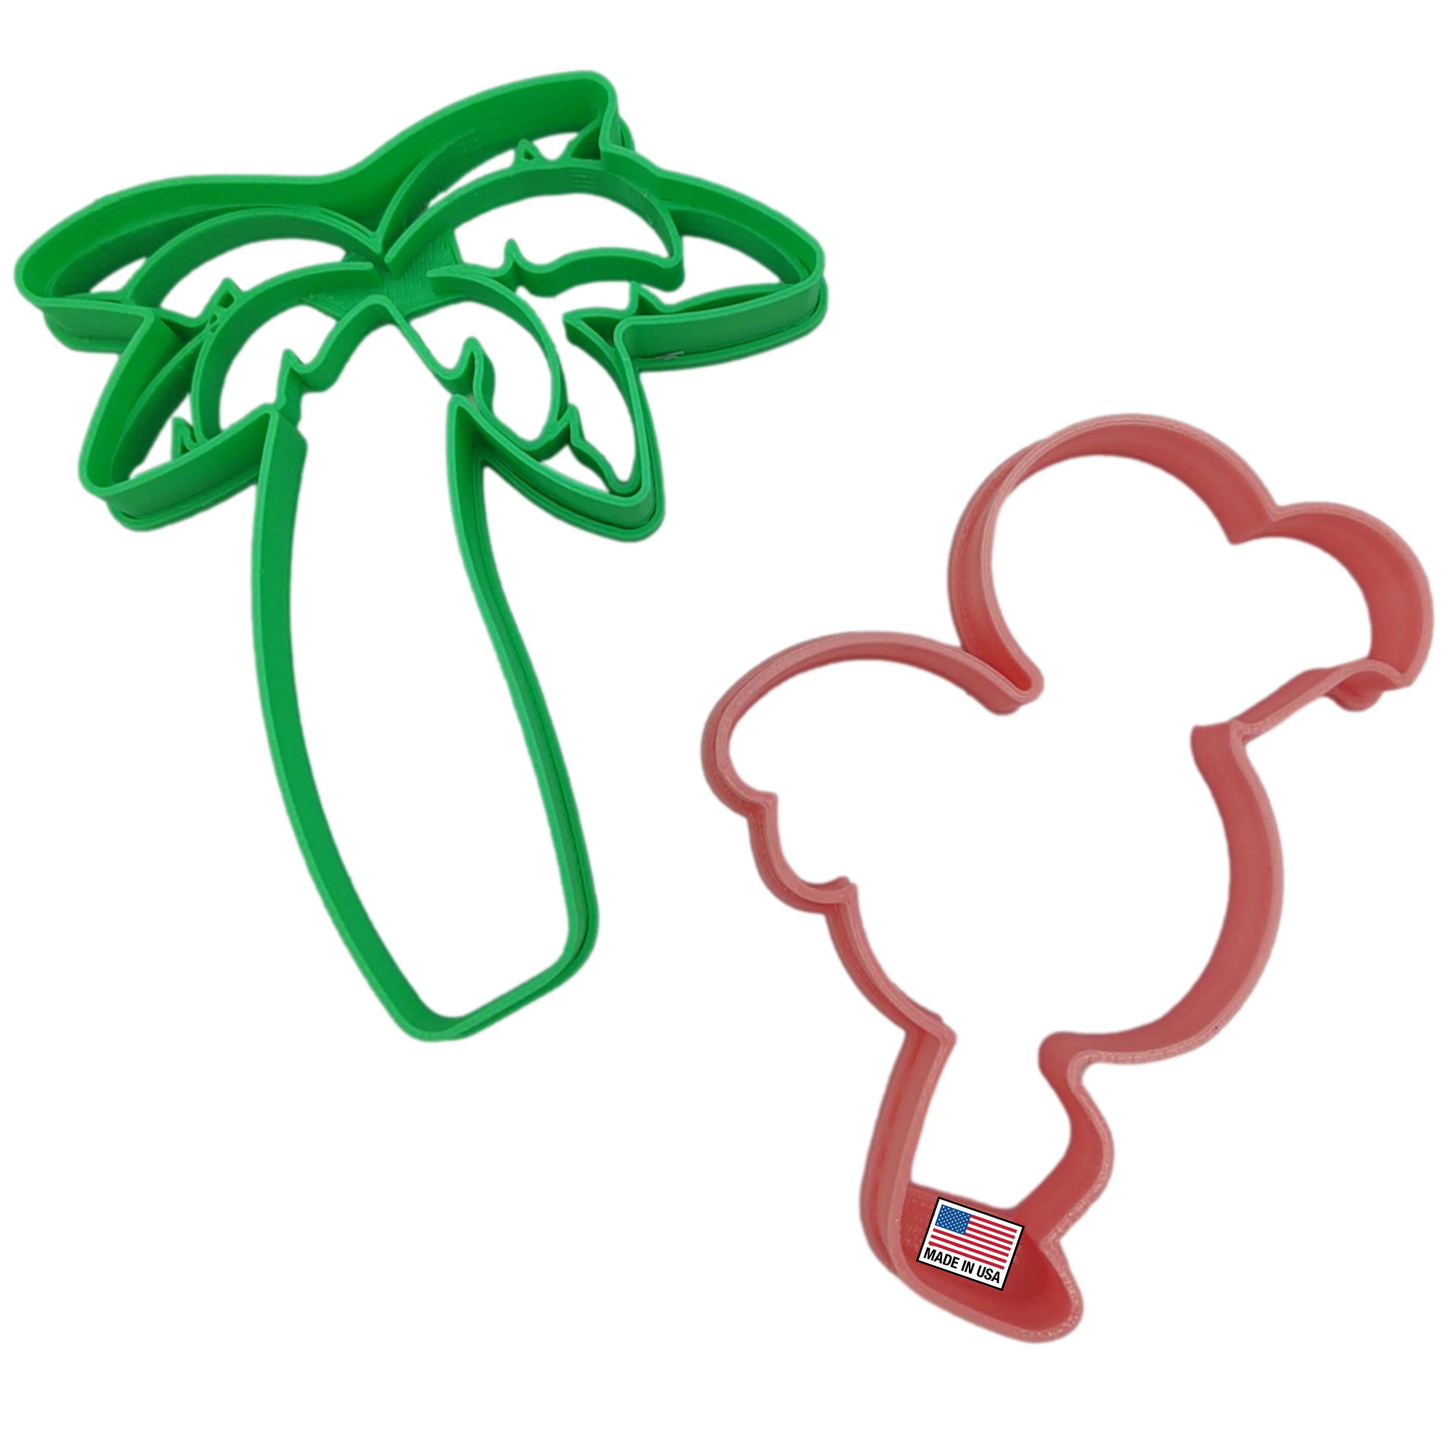 Flamingo Cookie Cutter With Palm Tree